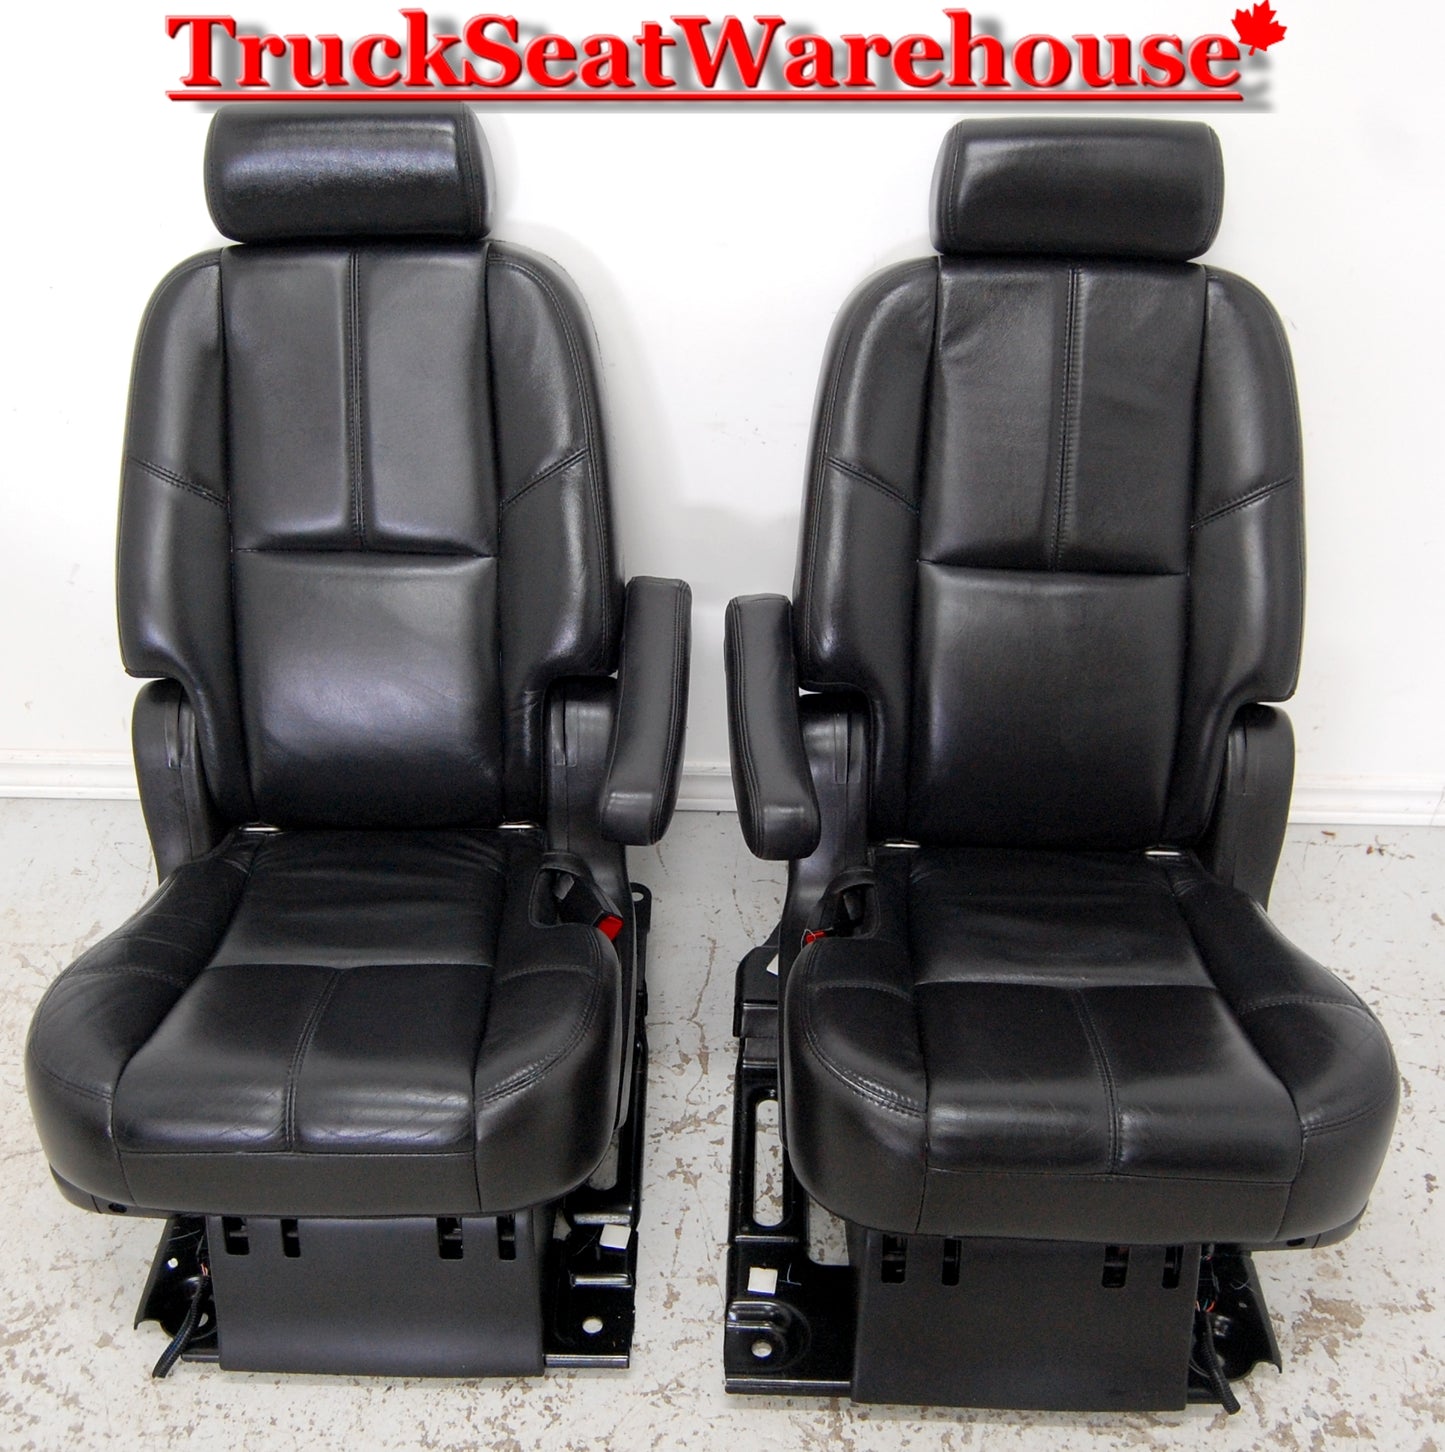 Black Leather captains chairs bucket seats from the 2nd second row of a 2013 Chev Suburban. fits GMC Yukon XL | Escalade ESV | 